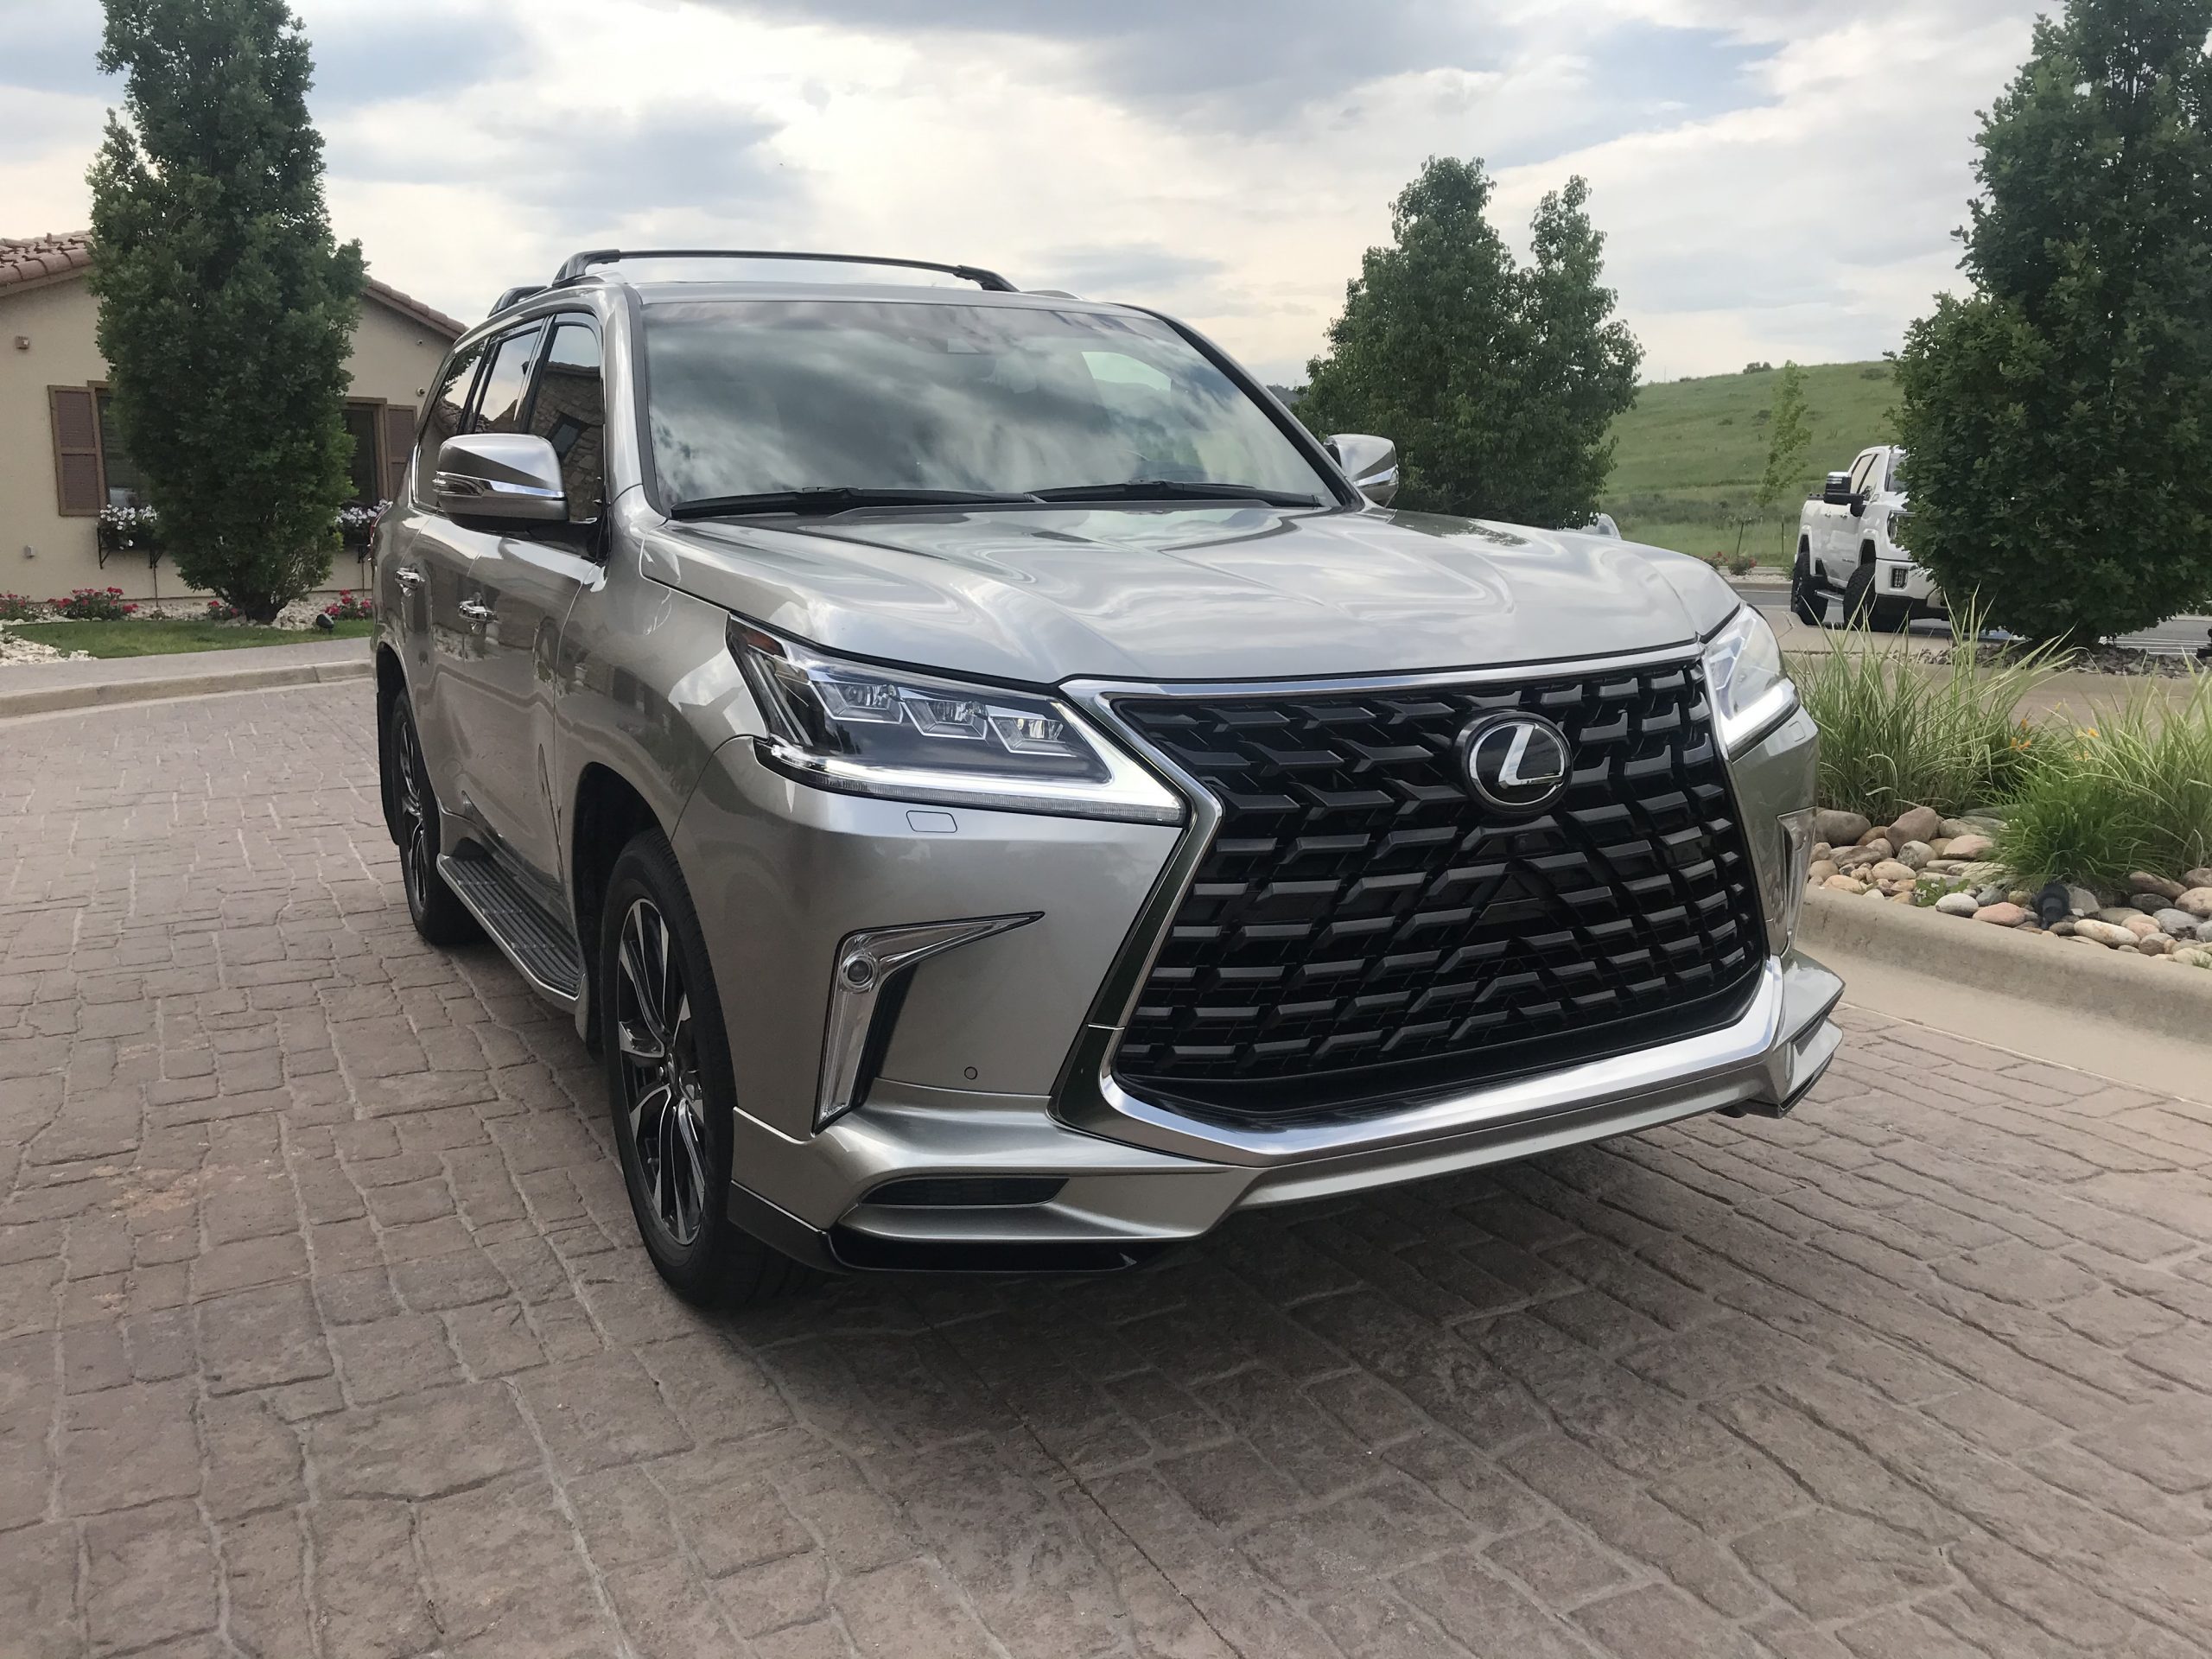 2021 Lexus LX 570 Review, Pricing, and Specs